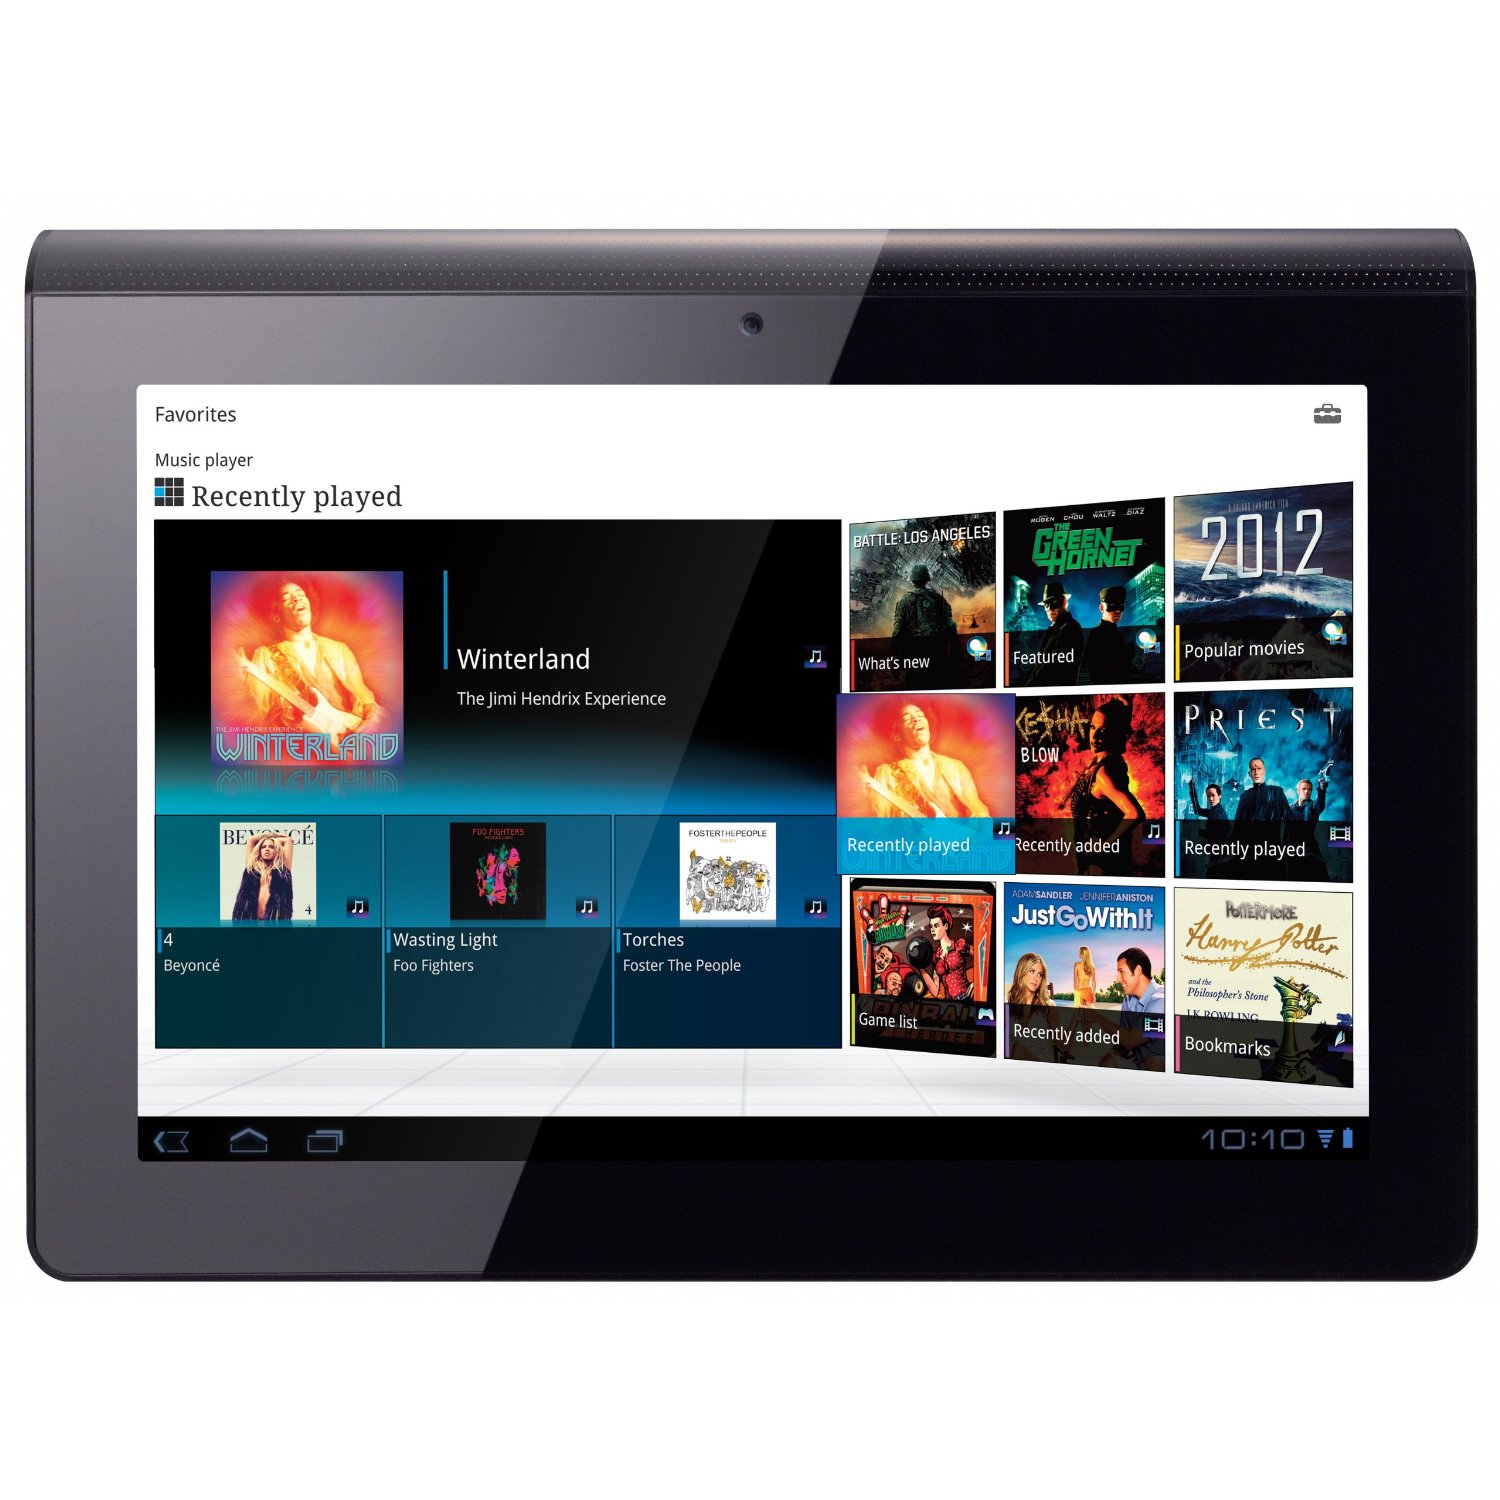 http://thetechjournal.com/wp-content/uploads/images/1109/1316407190-sony-sgpt111uss-wifi-16gb-tablet-1.jpg